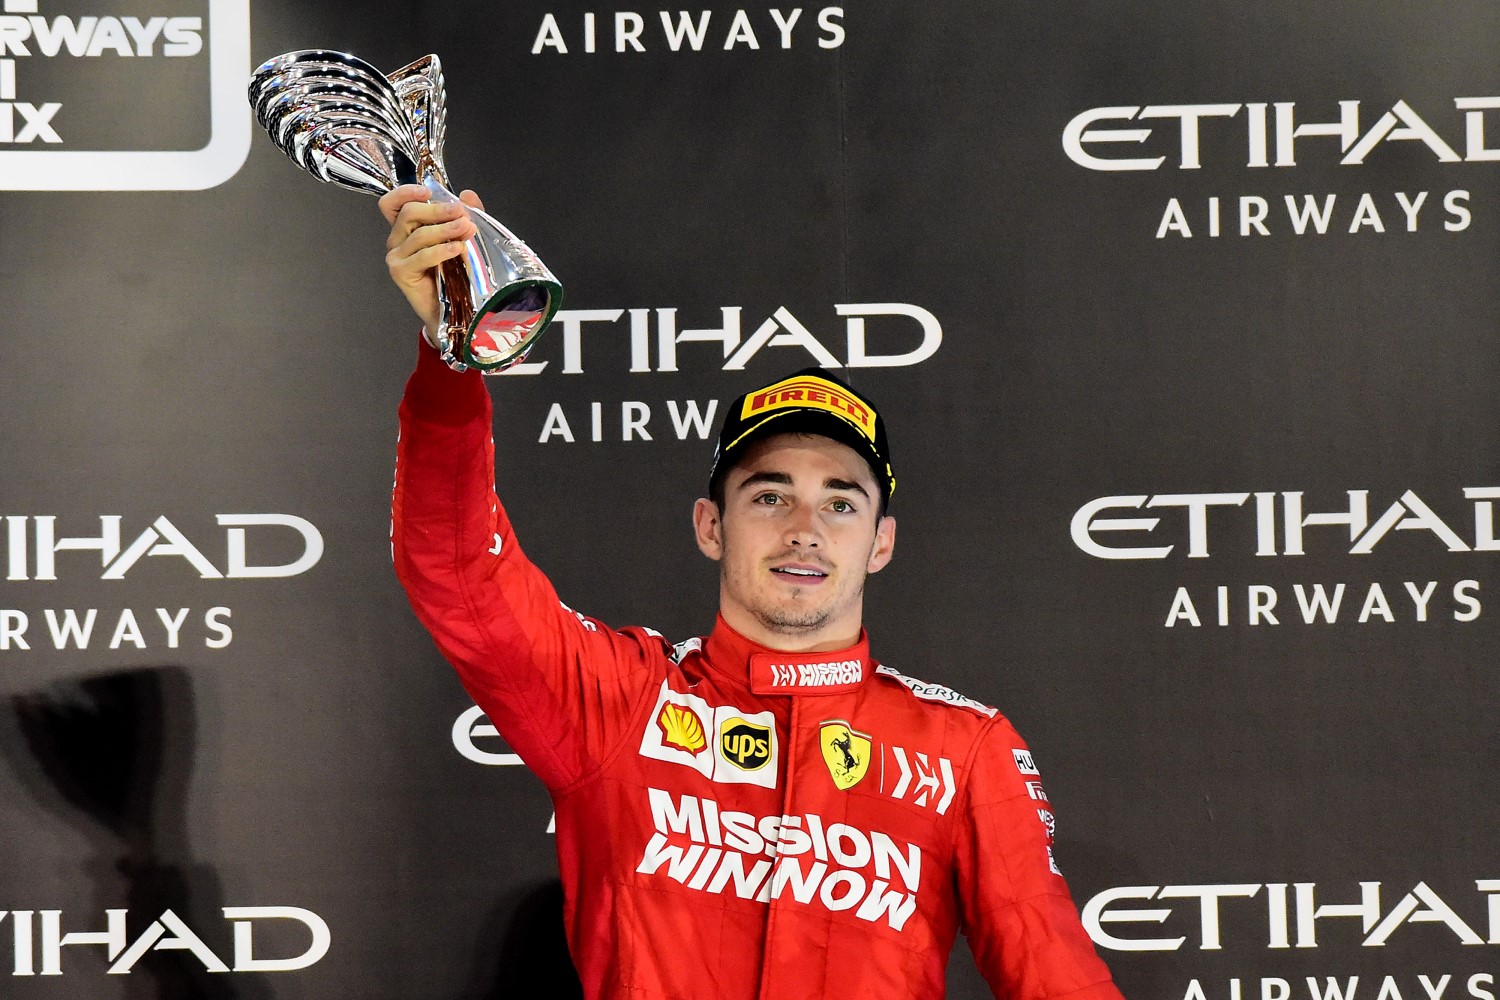 3rd for Leclerc